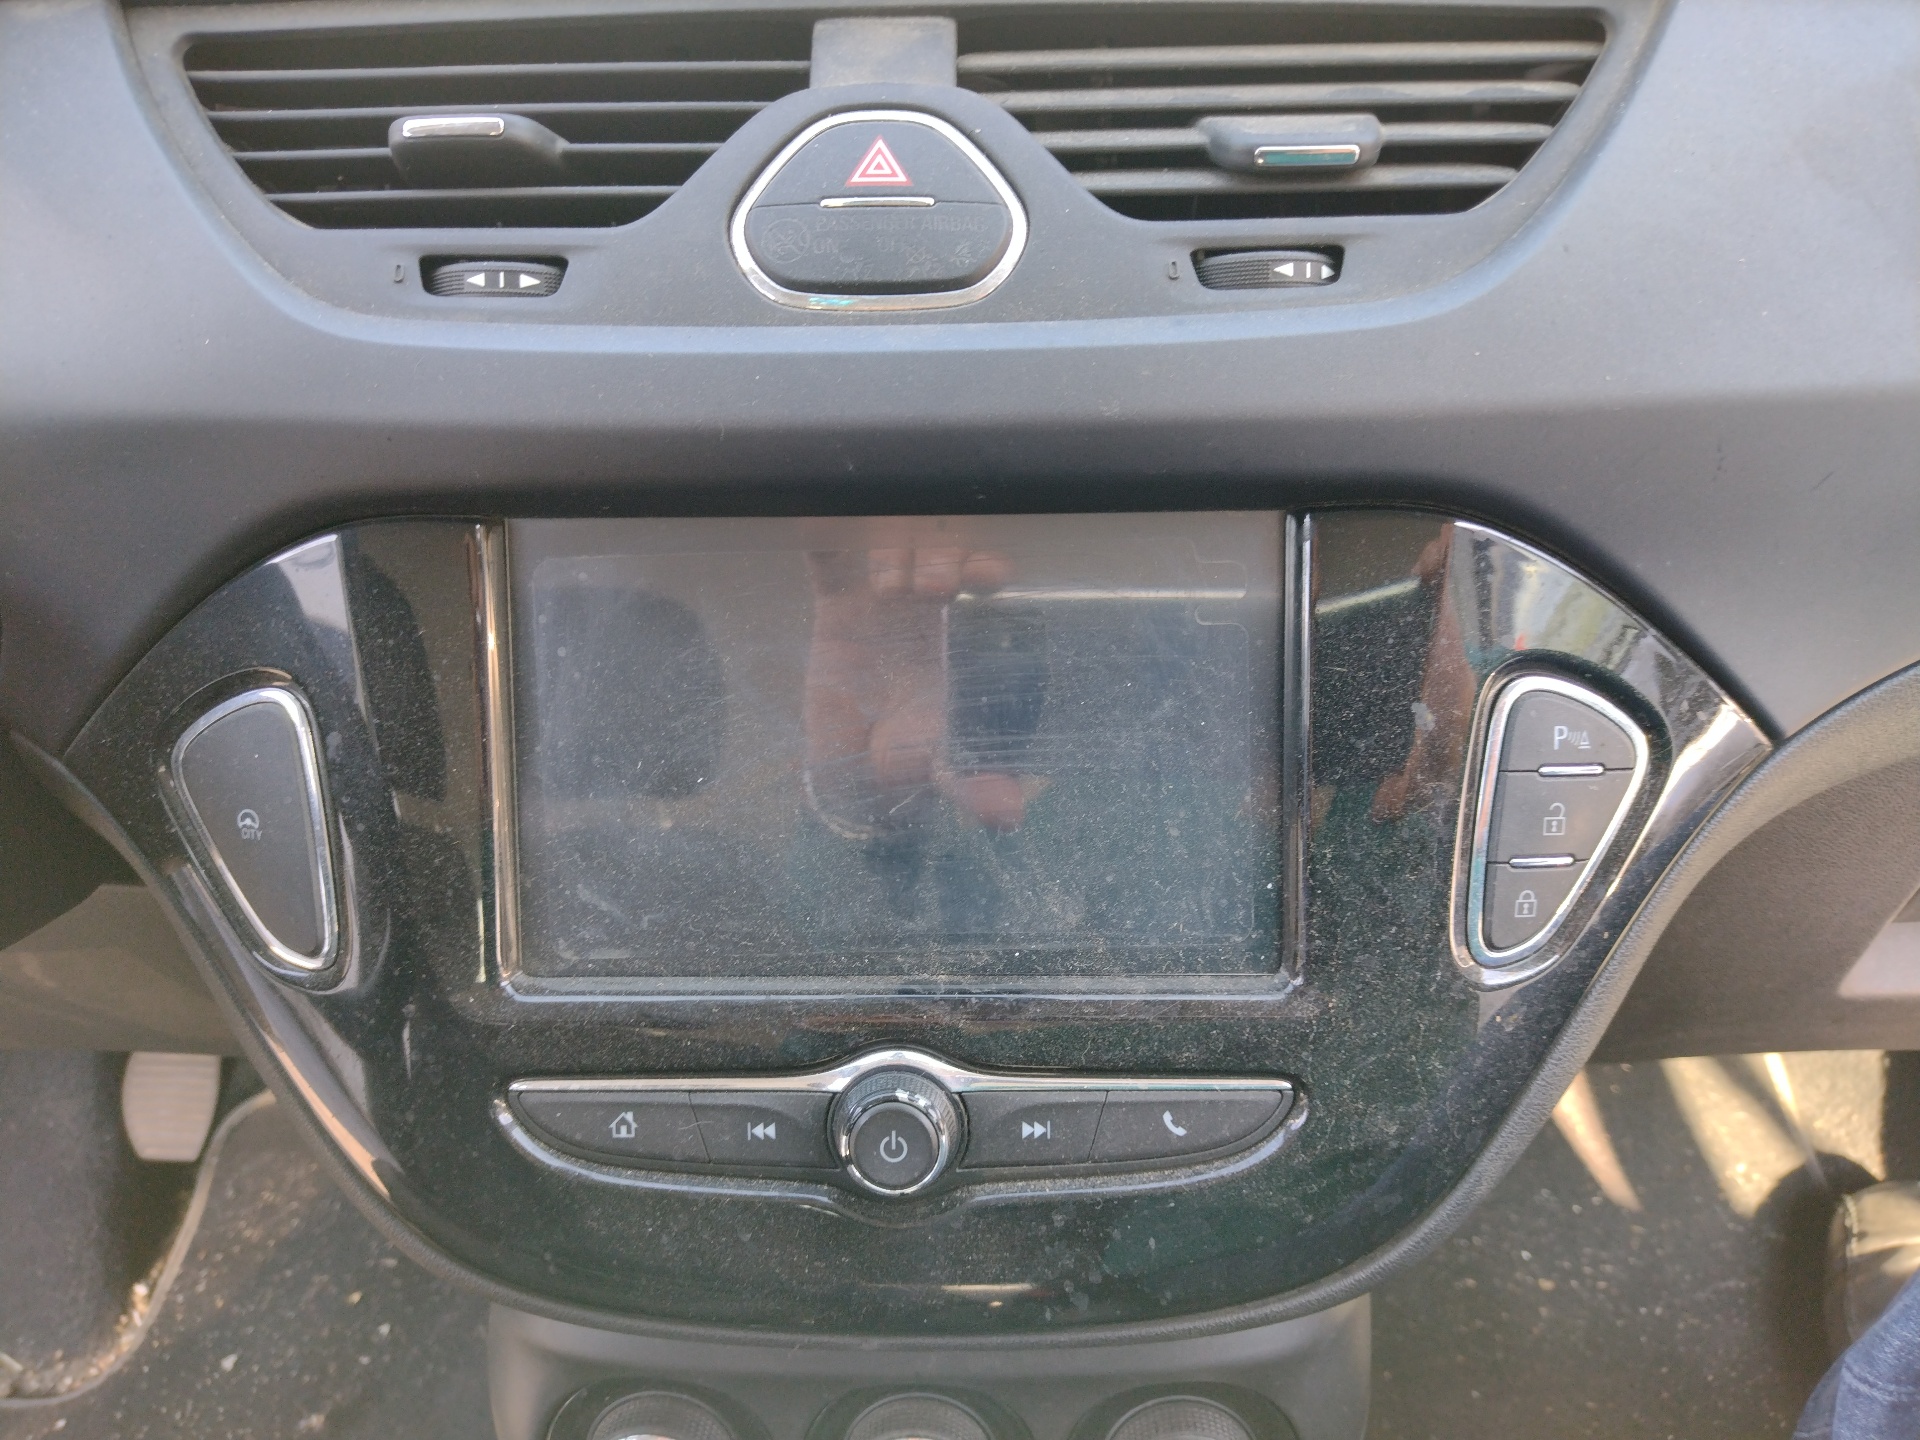 OPEL Corsa D (2006-2020) Music Player Without GPS 42554704 21279917